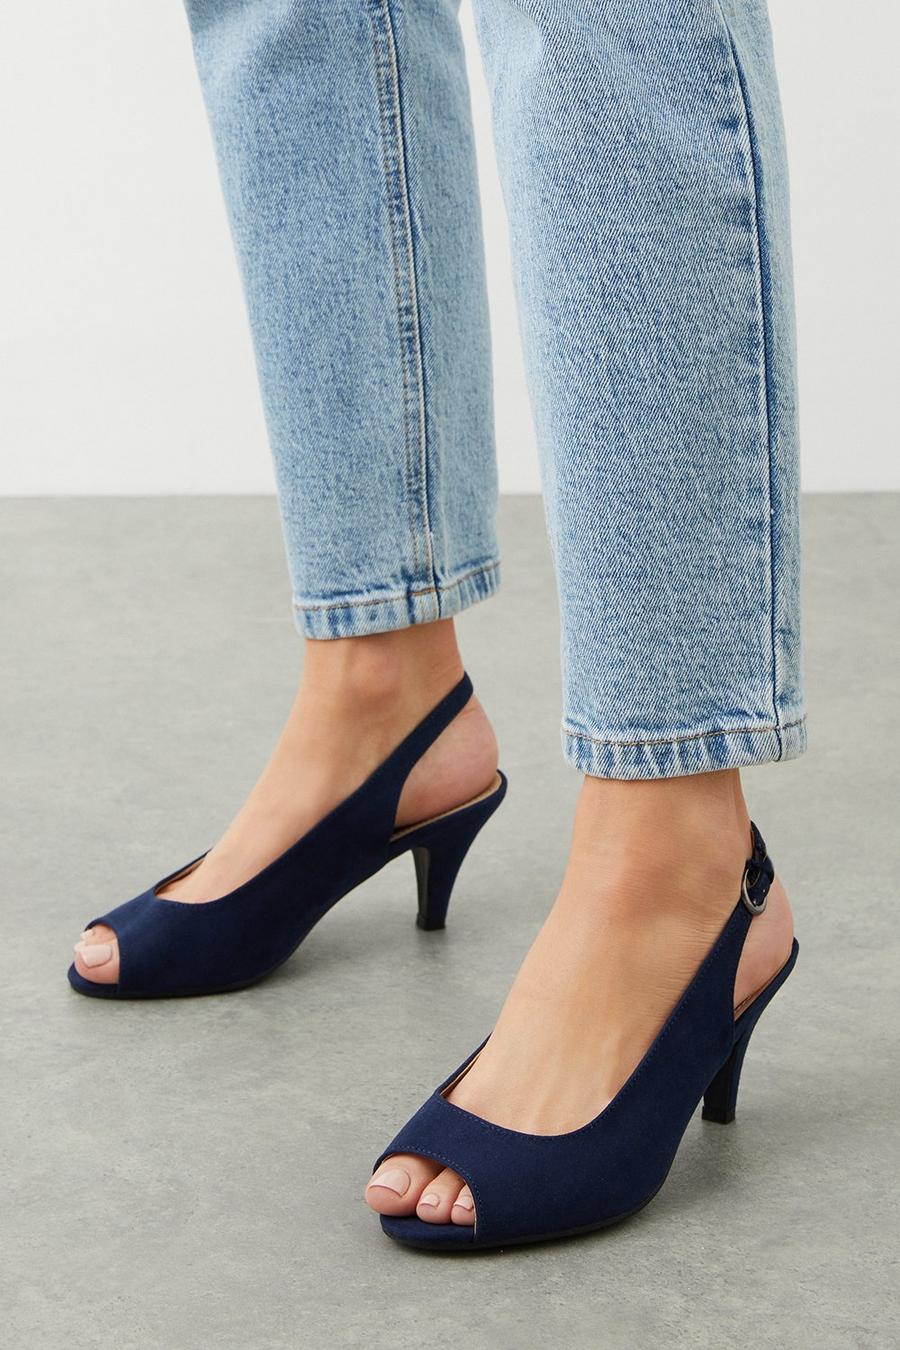 Good For The Sole: Evelyn Wide Fit Peep Toe Sling Back